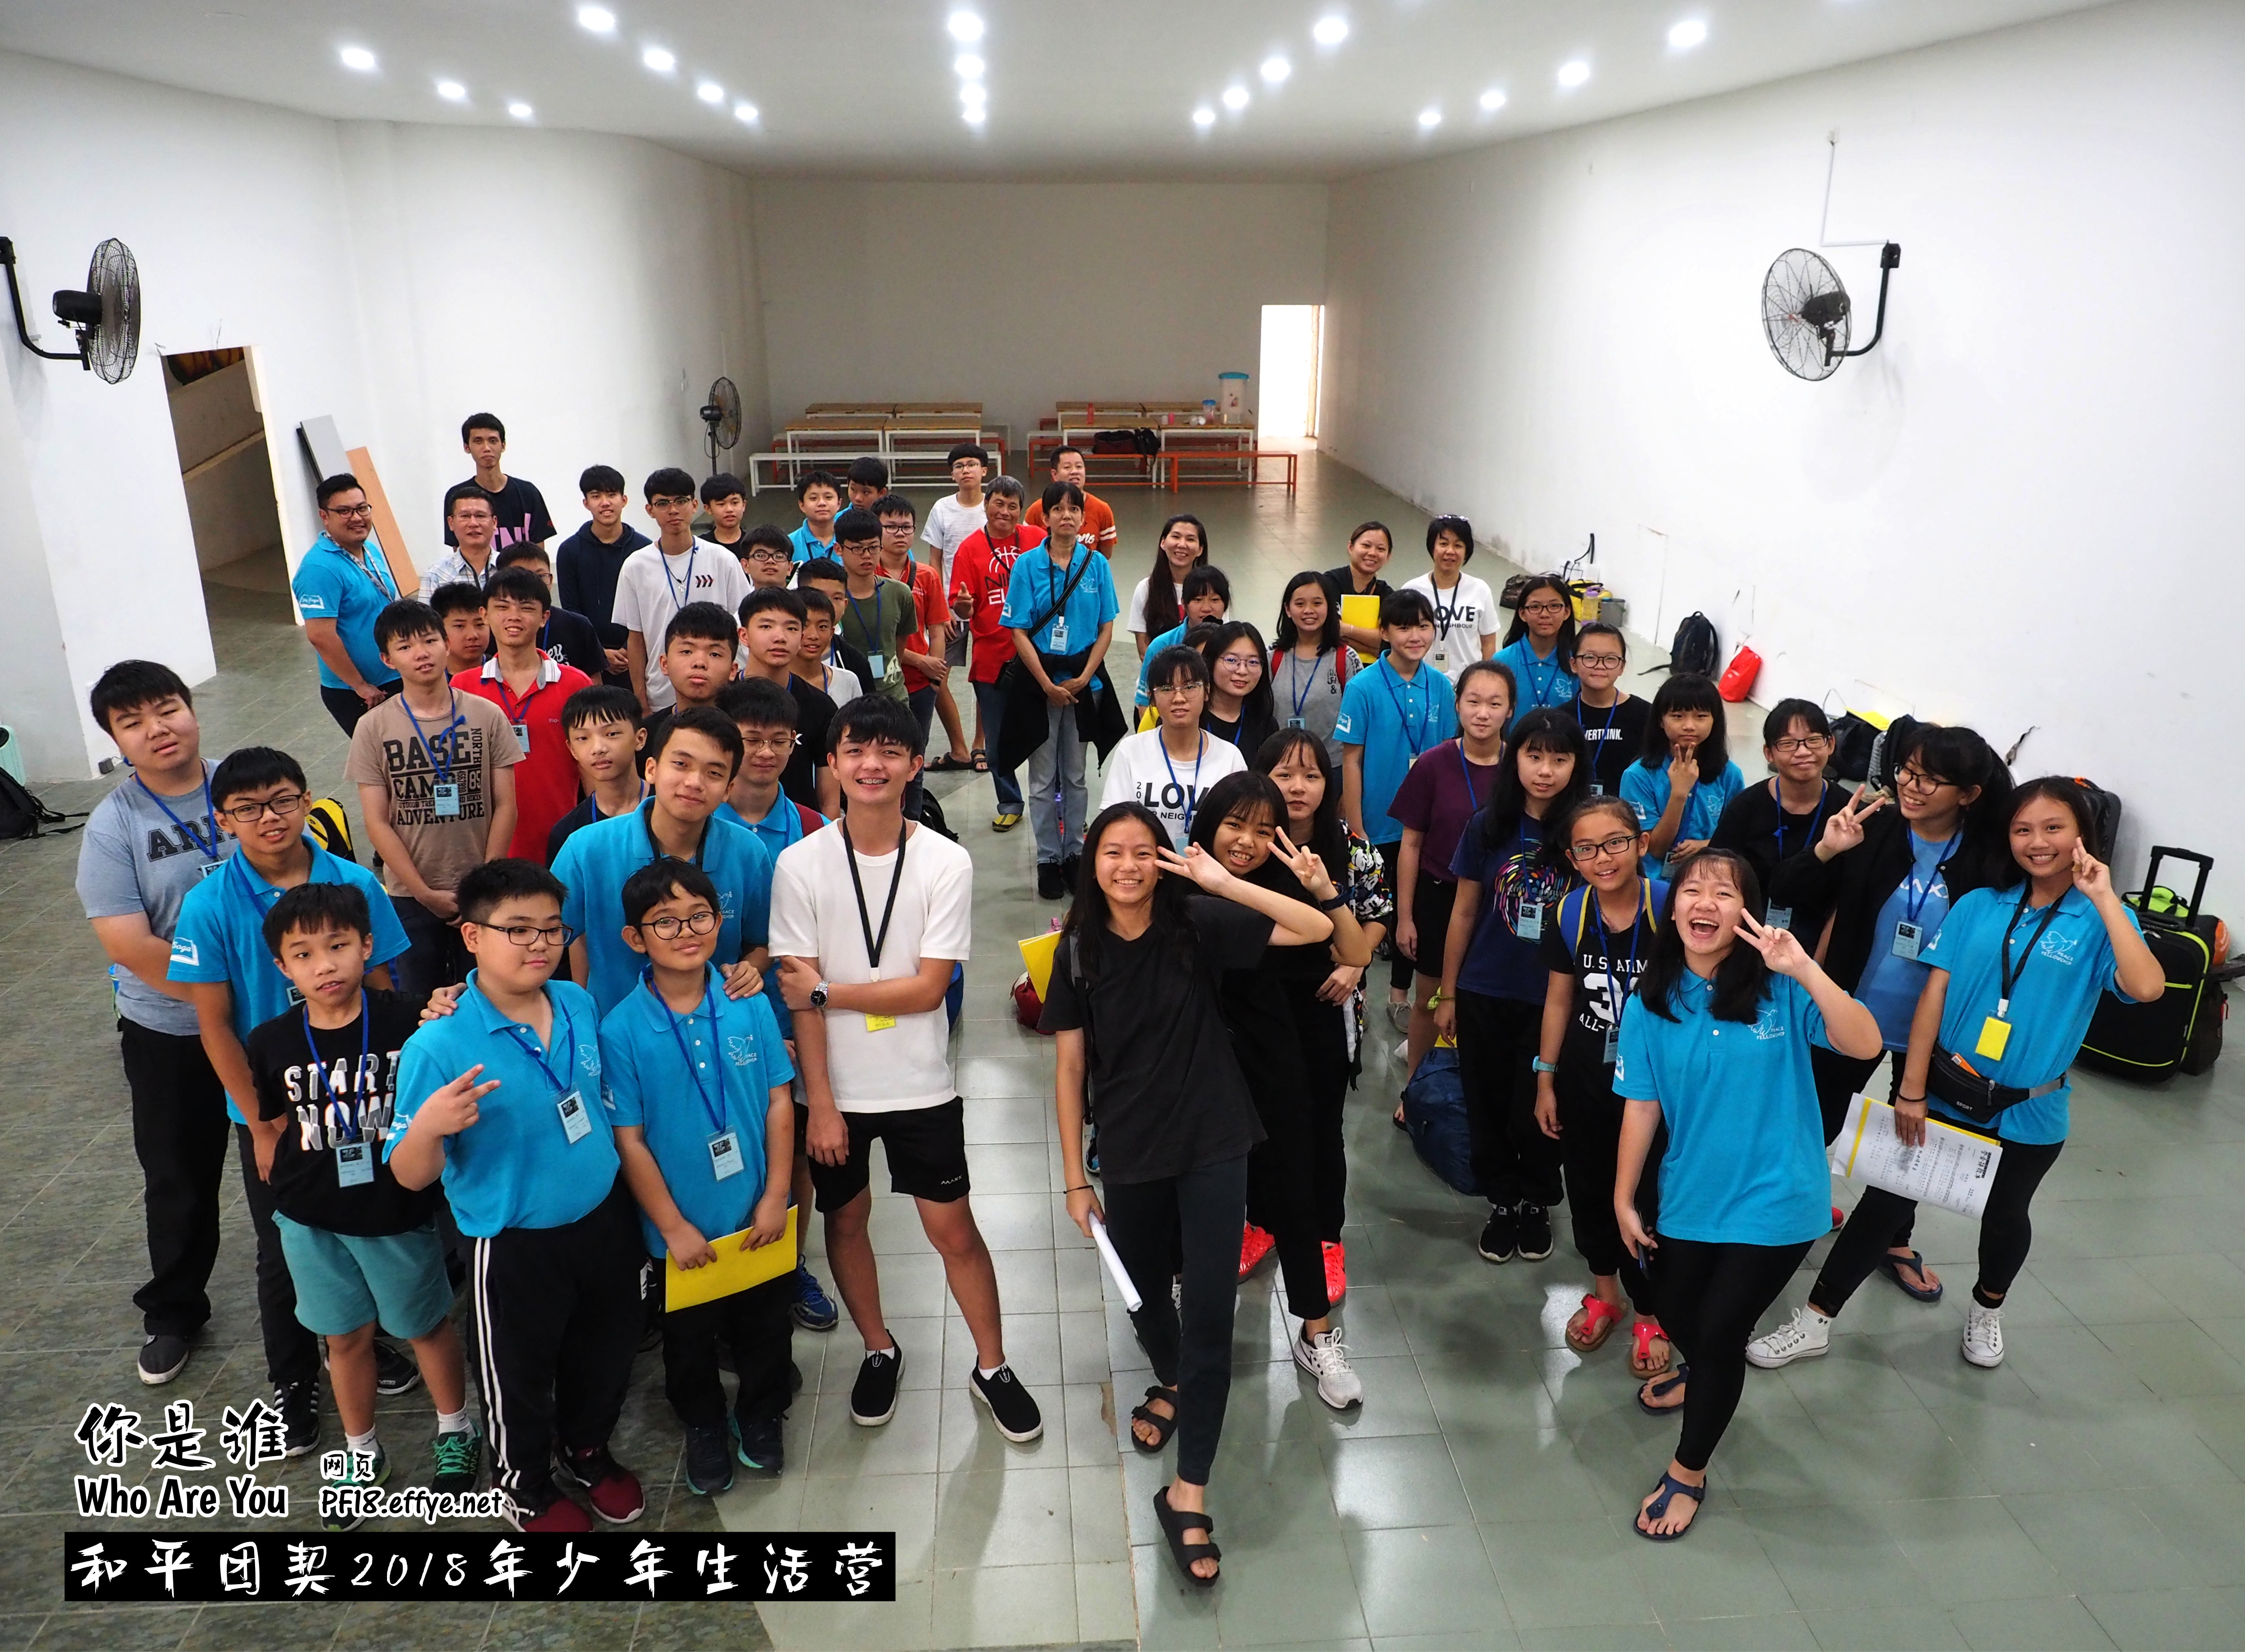 Peace Fellowship Youth Camp 2018 Who Are You 和平团契 2018 年少年生活营 你是谁 A001-002